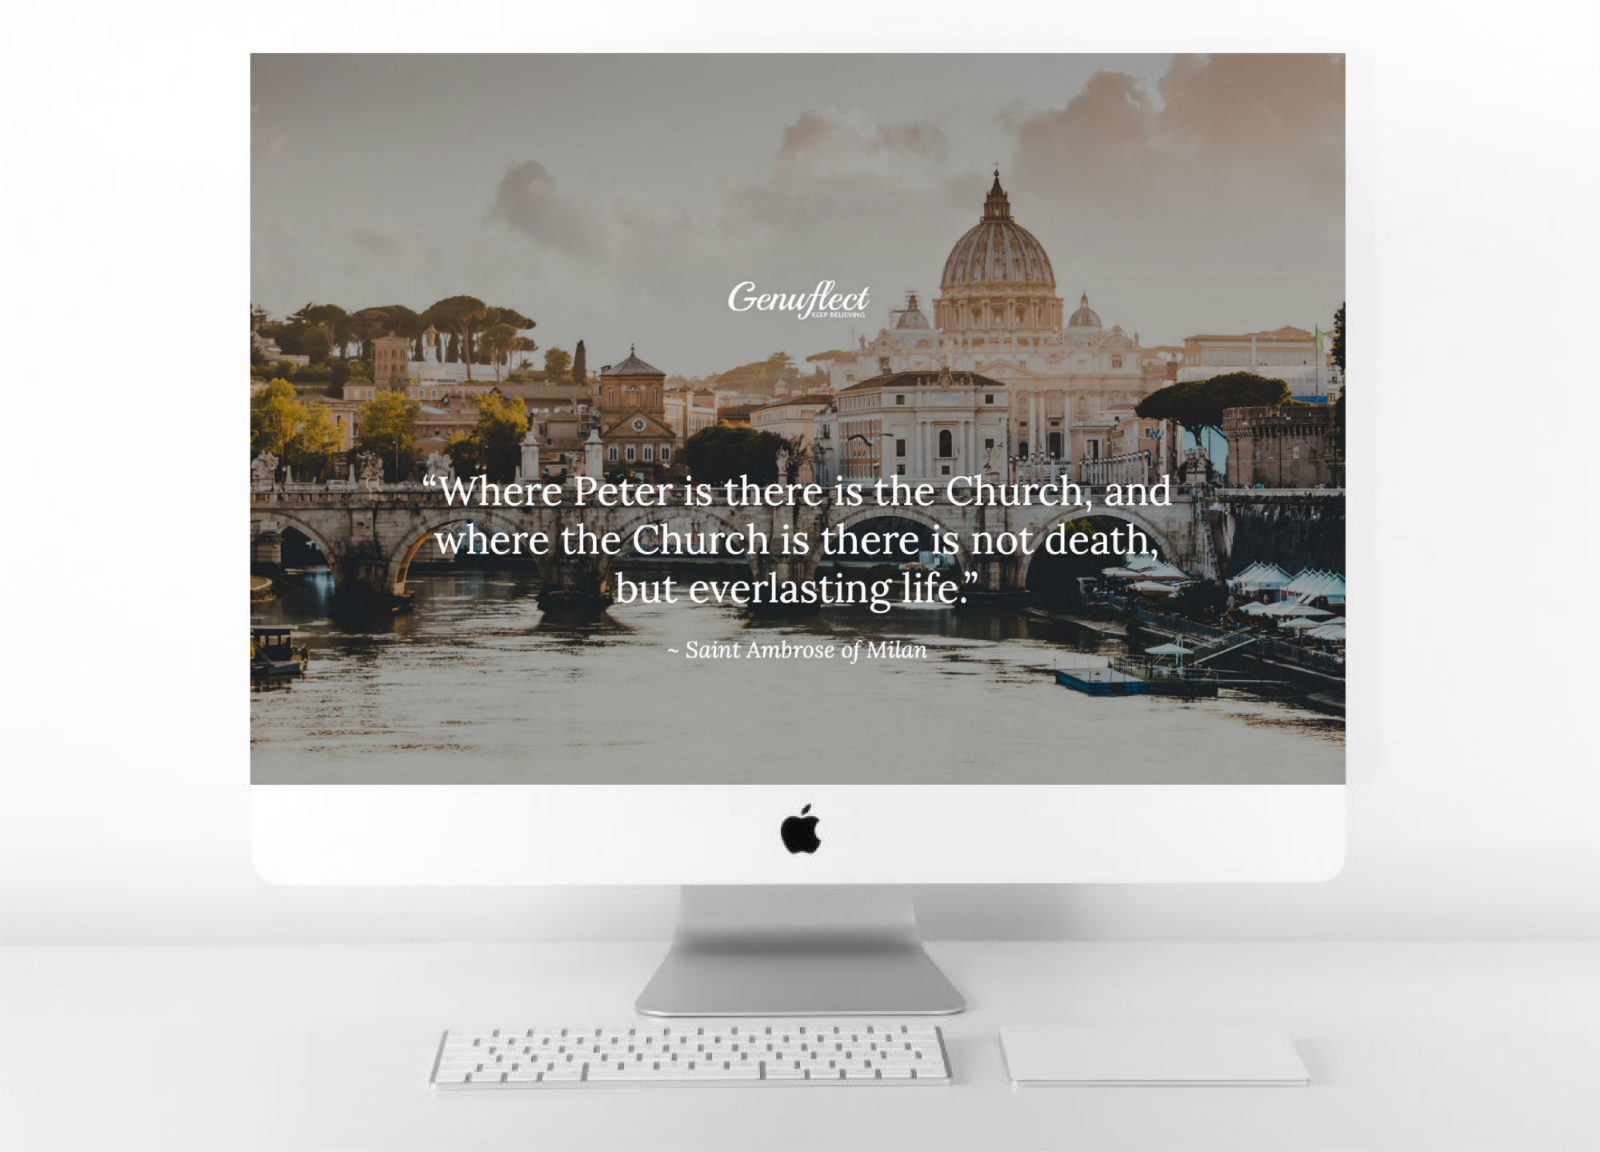 Genuflect.net - Computer Background image of St. Peter's Basilica at the Vatican